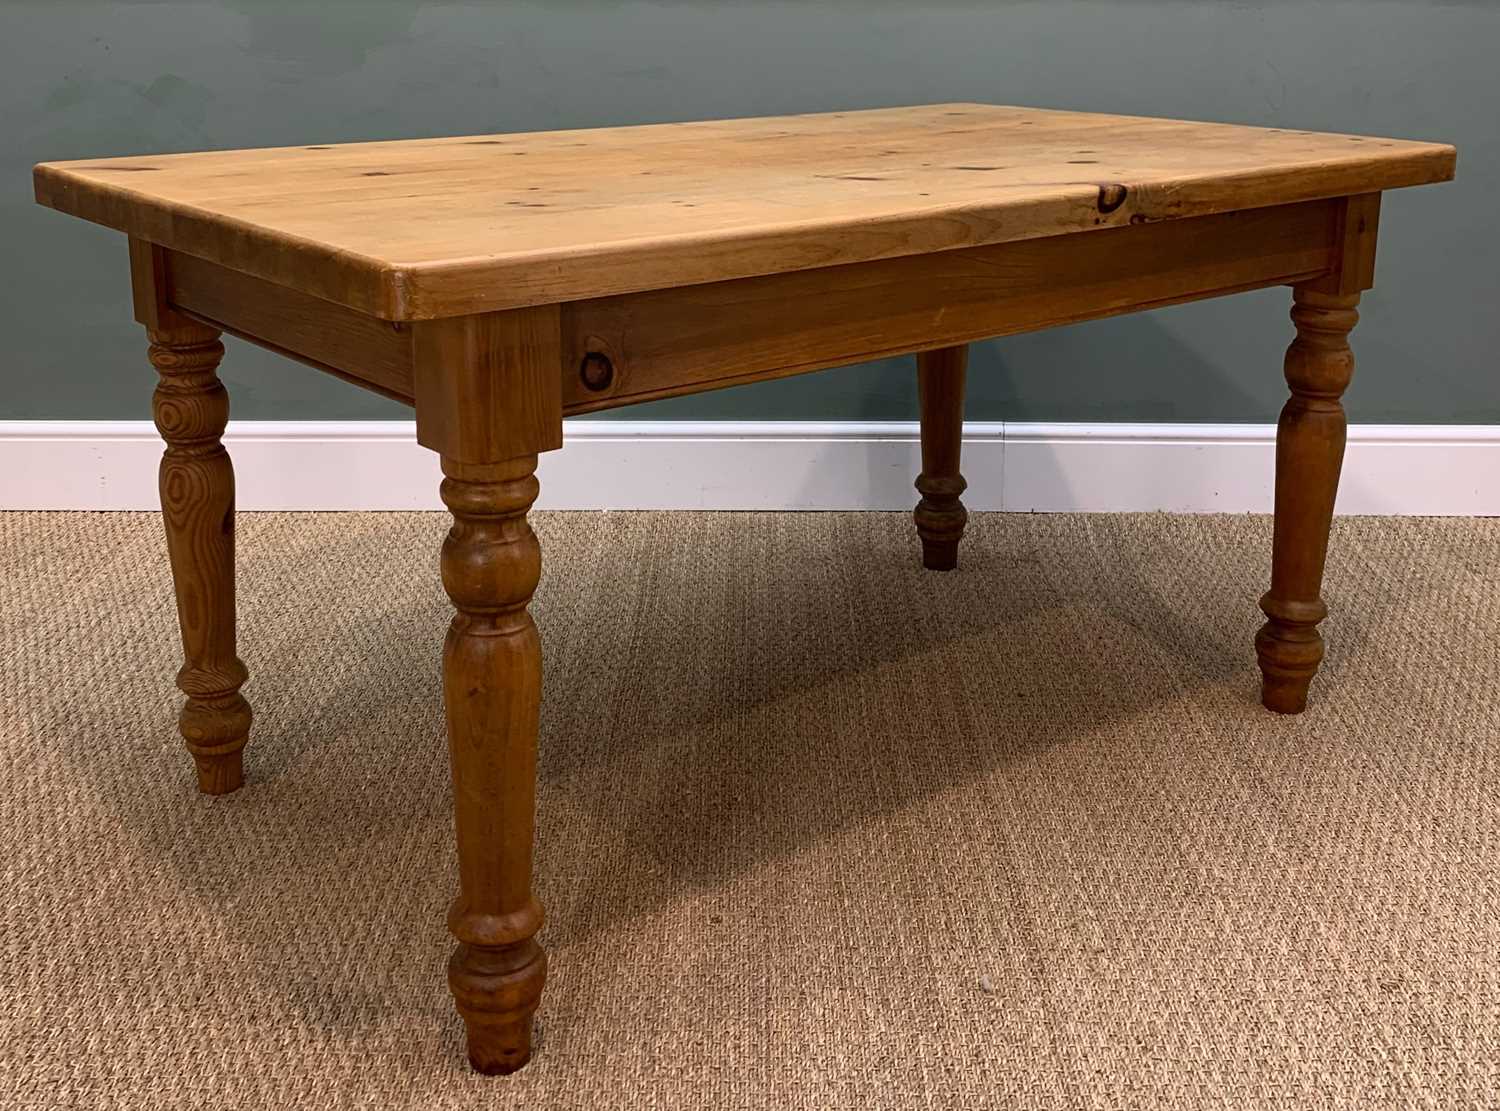 MODERN PINE KITCHEN TABLE, 78h x 152w x 89cms d Provenance: consigned via West Wales Comments: - Image 2 of 3